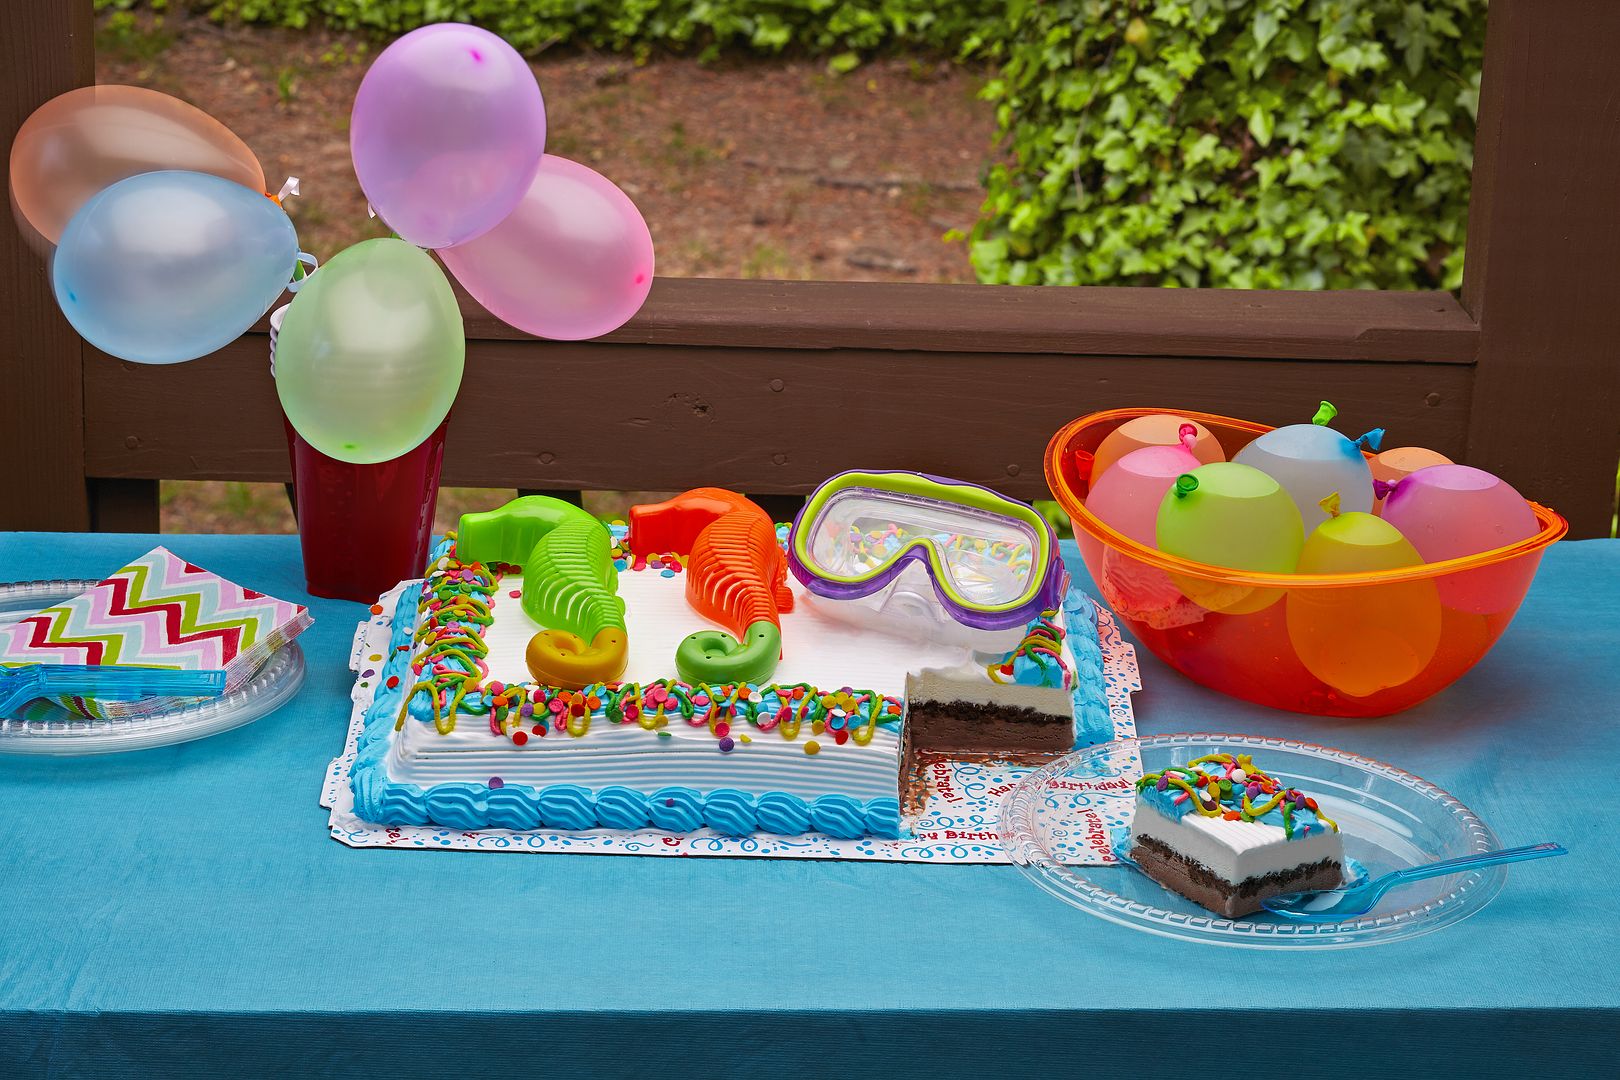 Easy tips for decorating a simple Carvel ice cream cake from your grocer's freezer: Store bought toys make it fun!